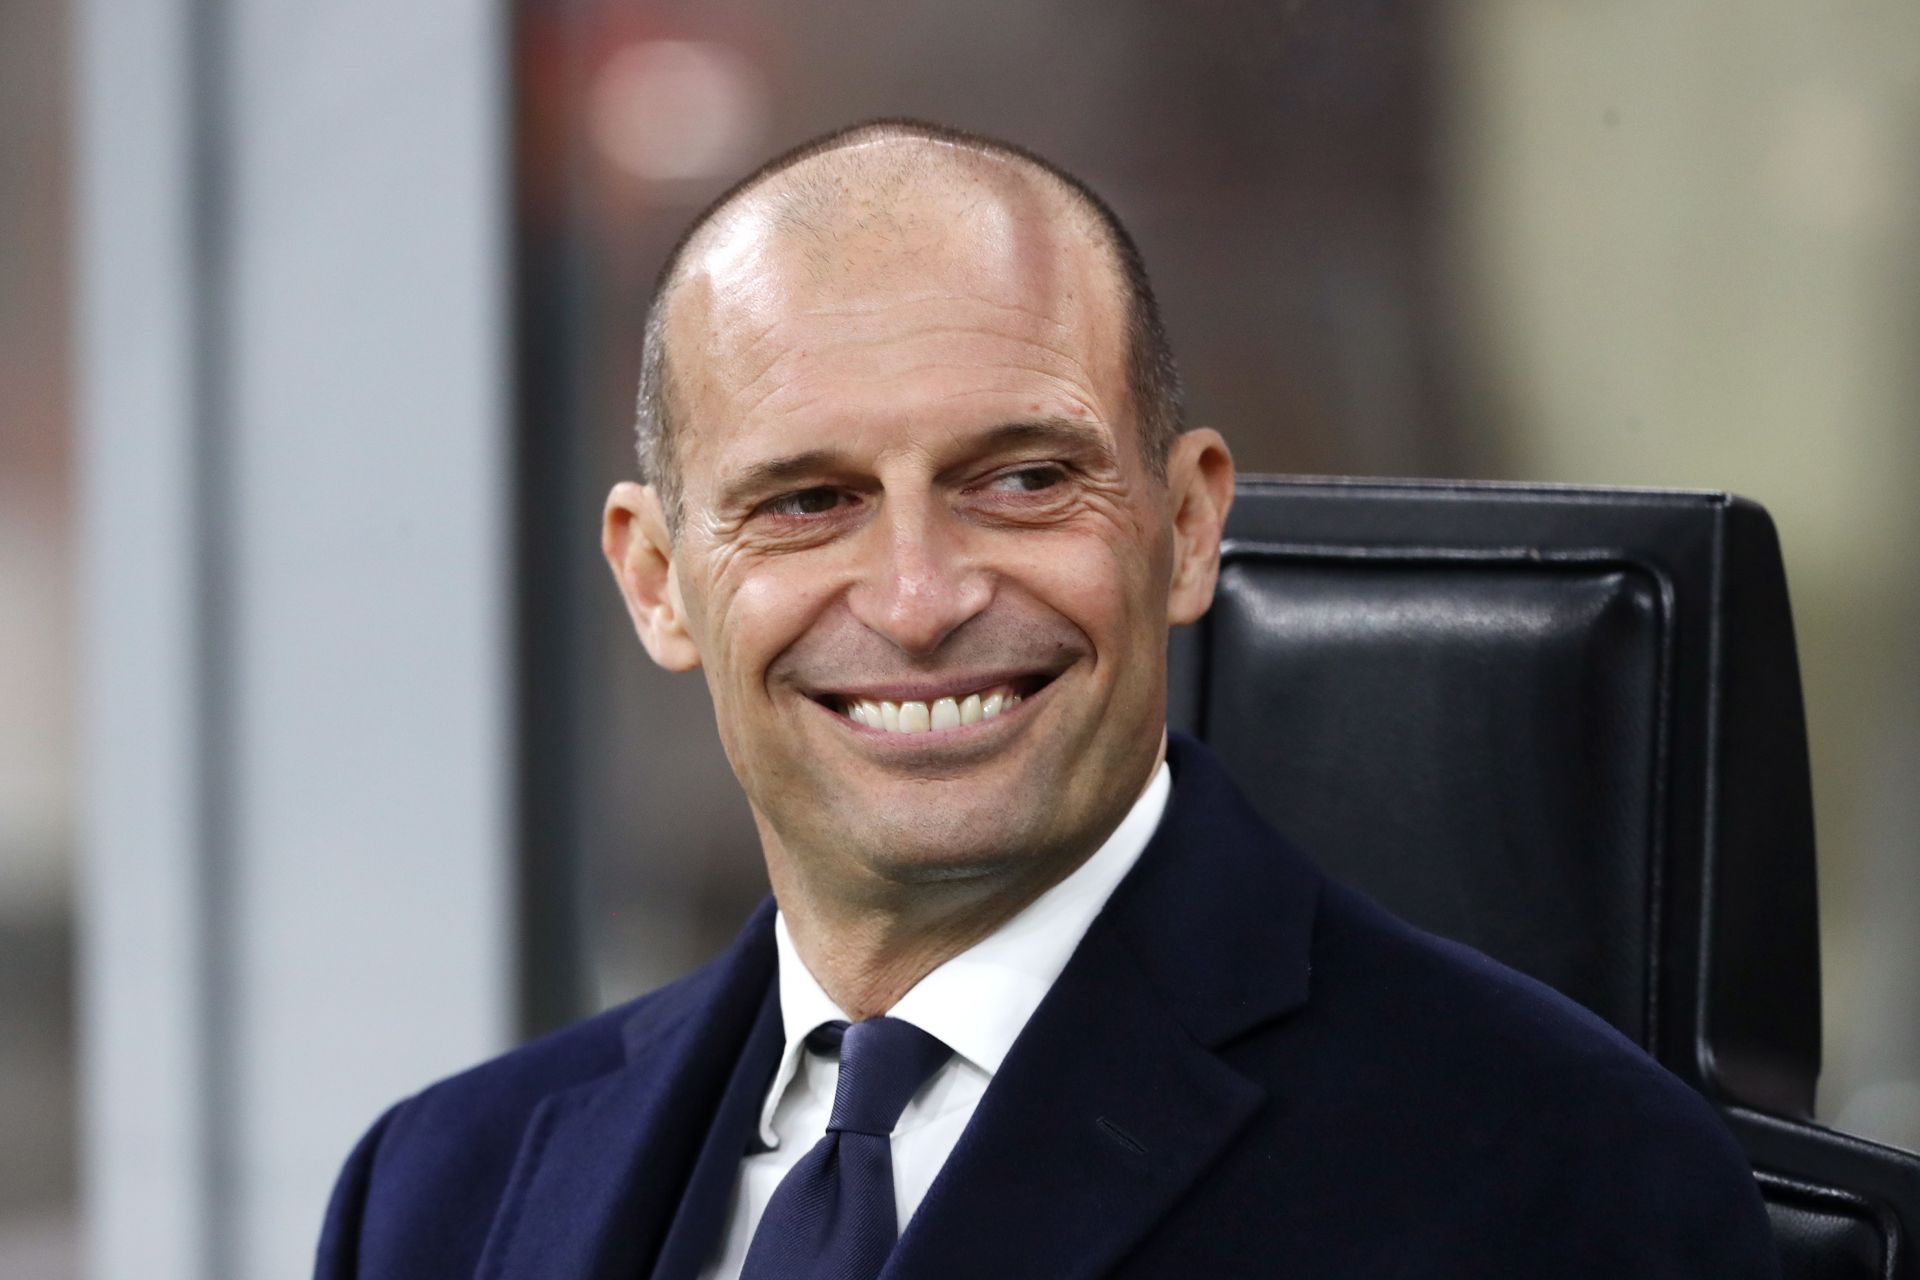 Massimiliano Allegri was offered to take charge at the Santiago Bernabeu last summer.